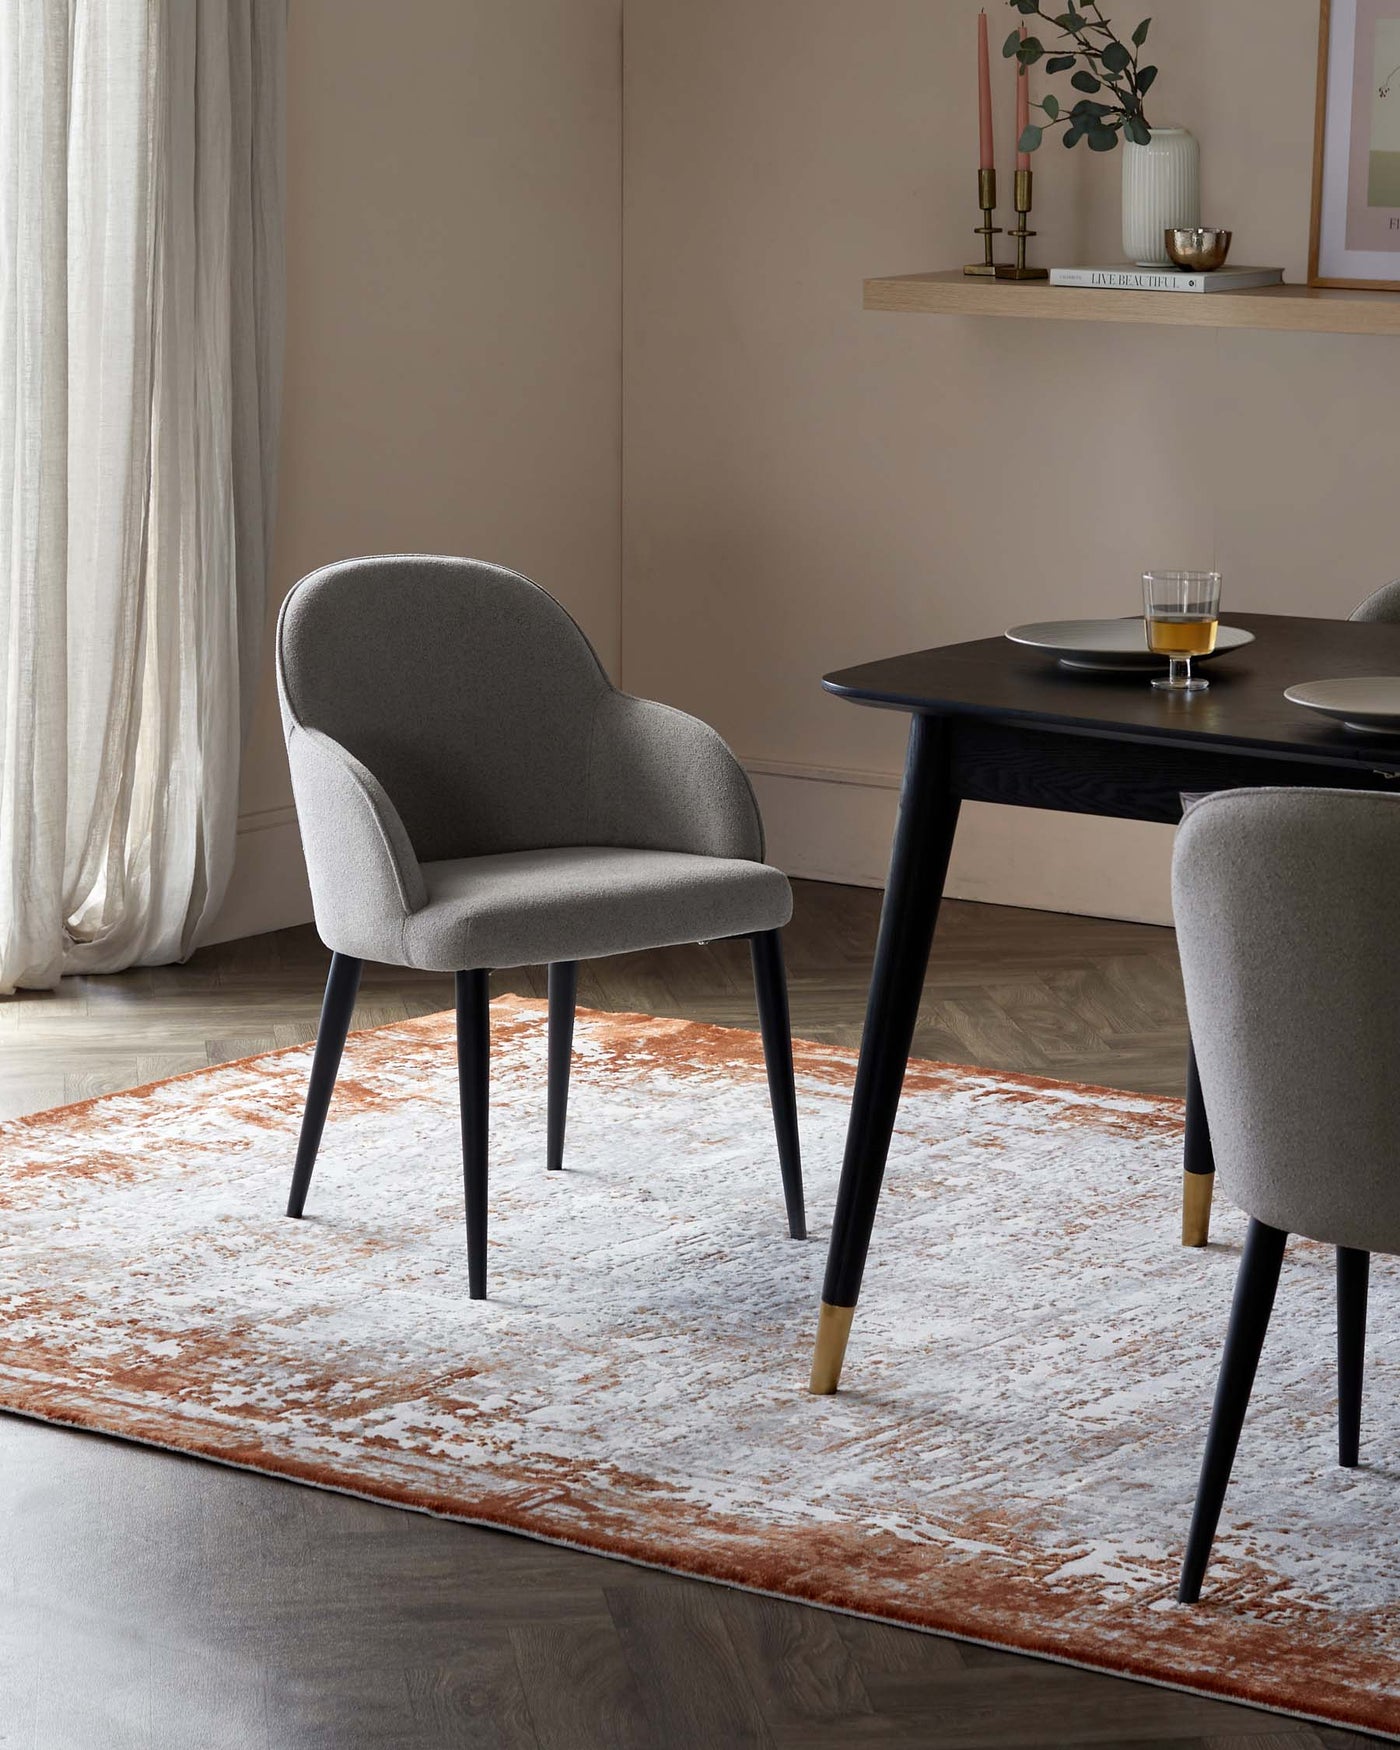 Modern dining setting featuring a round black table with an elegantly textured surface, complemented by a set of sophisticated grey upholstered chairs. Each chair exhibits a gently curved backrest and seat, supported by angled black legs accented with gold-toned tips, harmoniously blending comfort and luxury. The arrangement is centred on a distressed white and terra cotta area rug, which adds a warm, inviting touch to the scene.